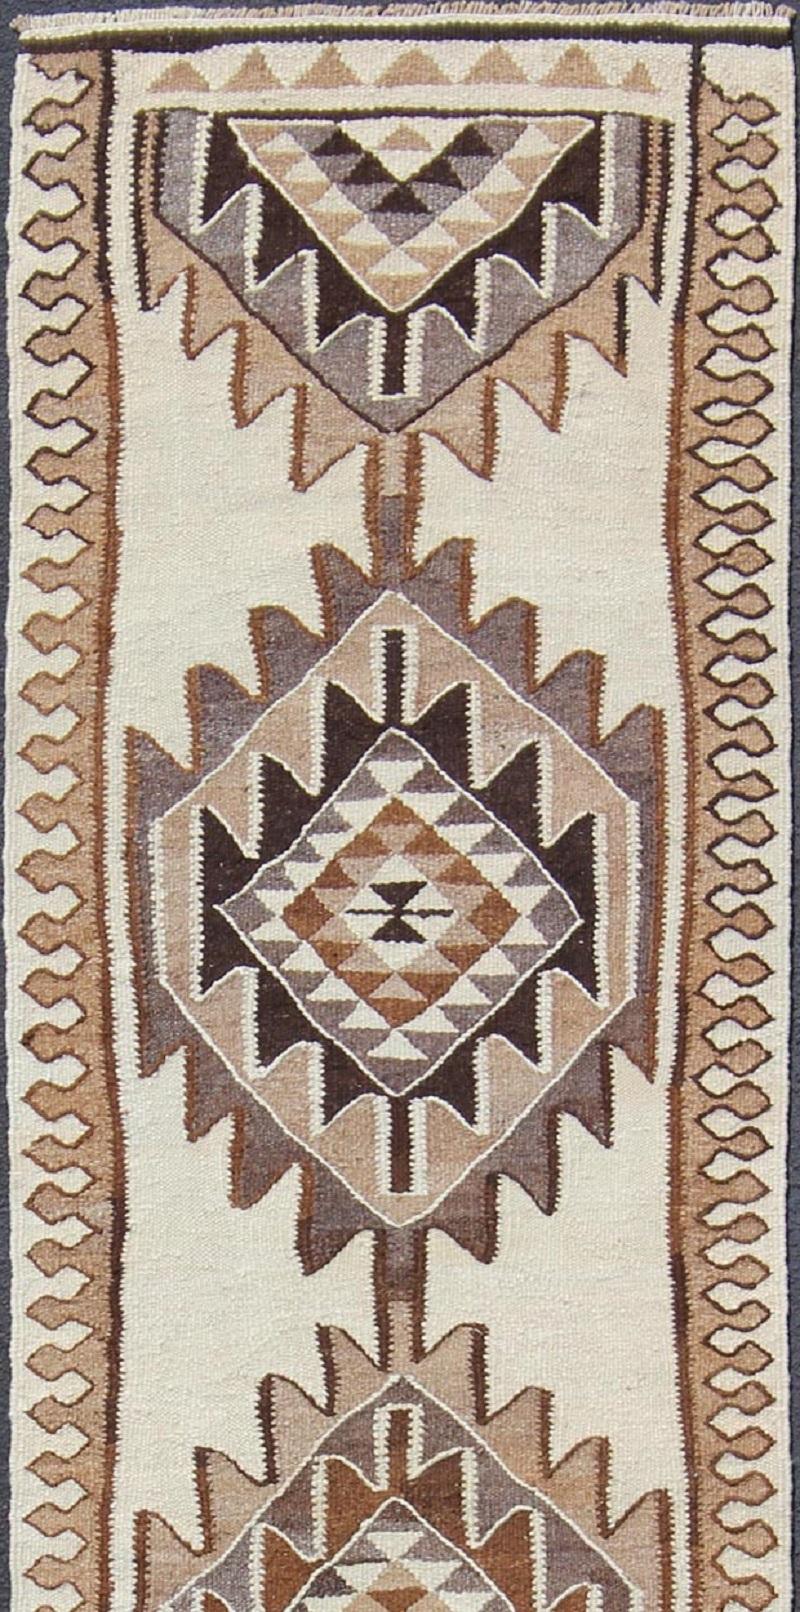 Vintage Turkish Kilim Runner with Tribal Medallions in Shades of Brown and Cream In Excellent Condition For Sale In Atlanta, GA